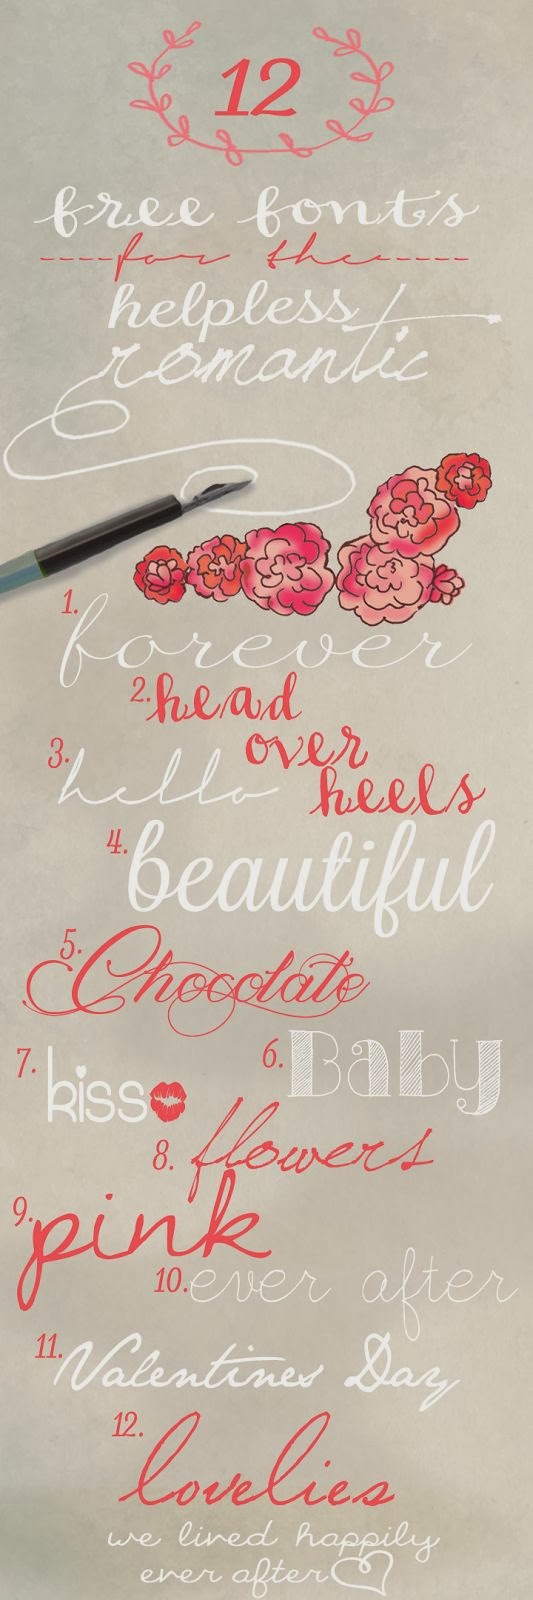 http://www.welivedhappilyeverafter.com/2014/01/12-free-fonts-for-helpless-romantic.html?m=1